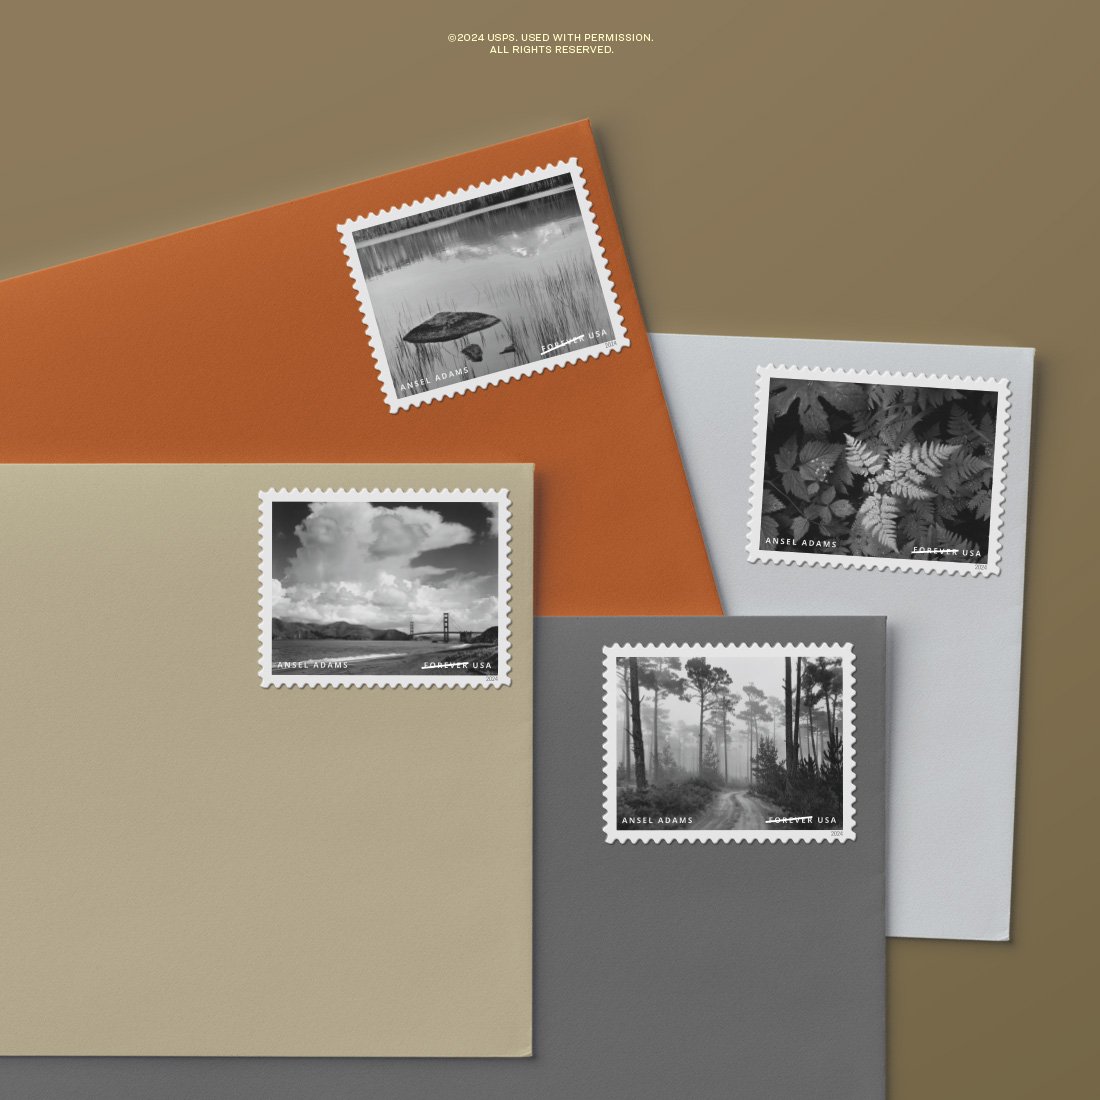 USPS Ansel Adams Stamps